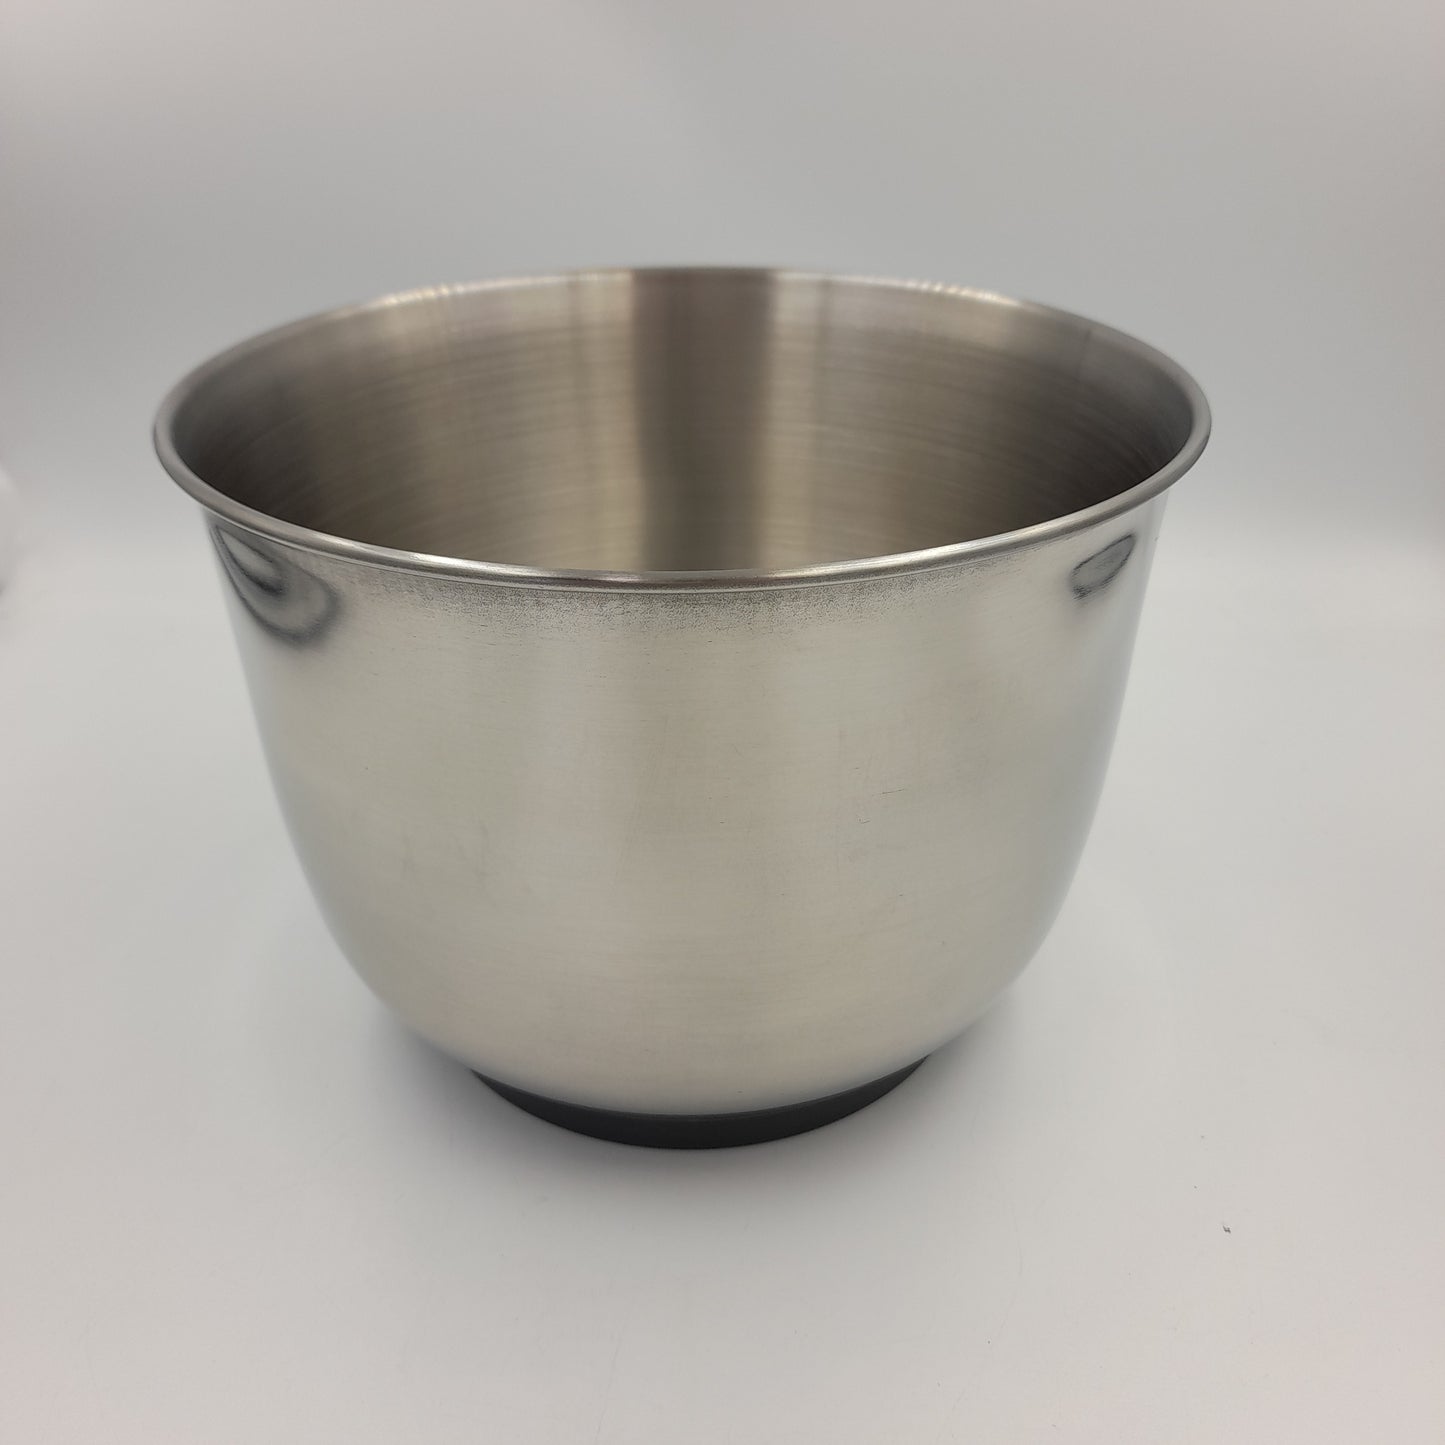 Mixer Bowl 3.5l Stainless Steel - 2193594